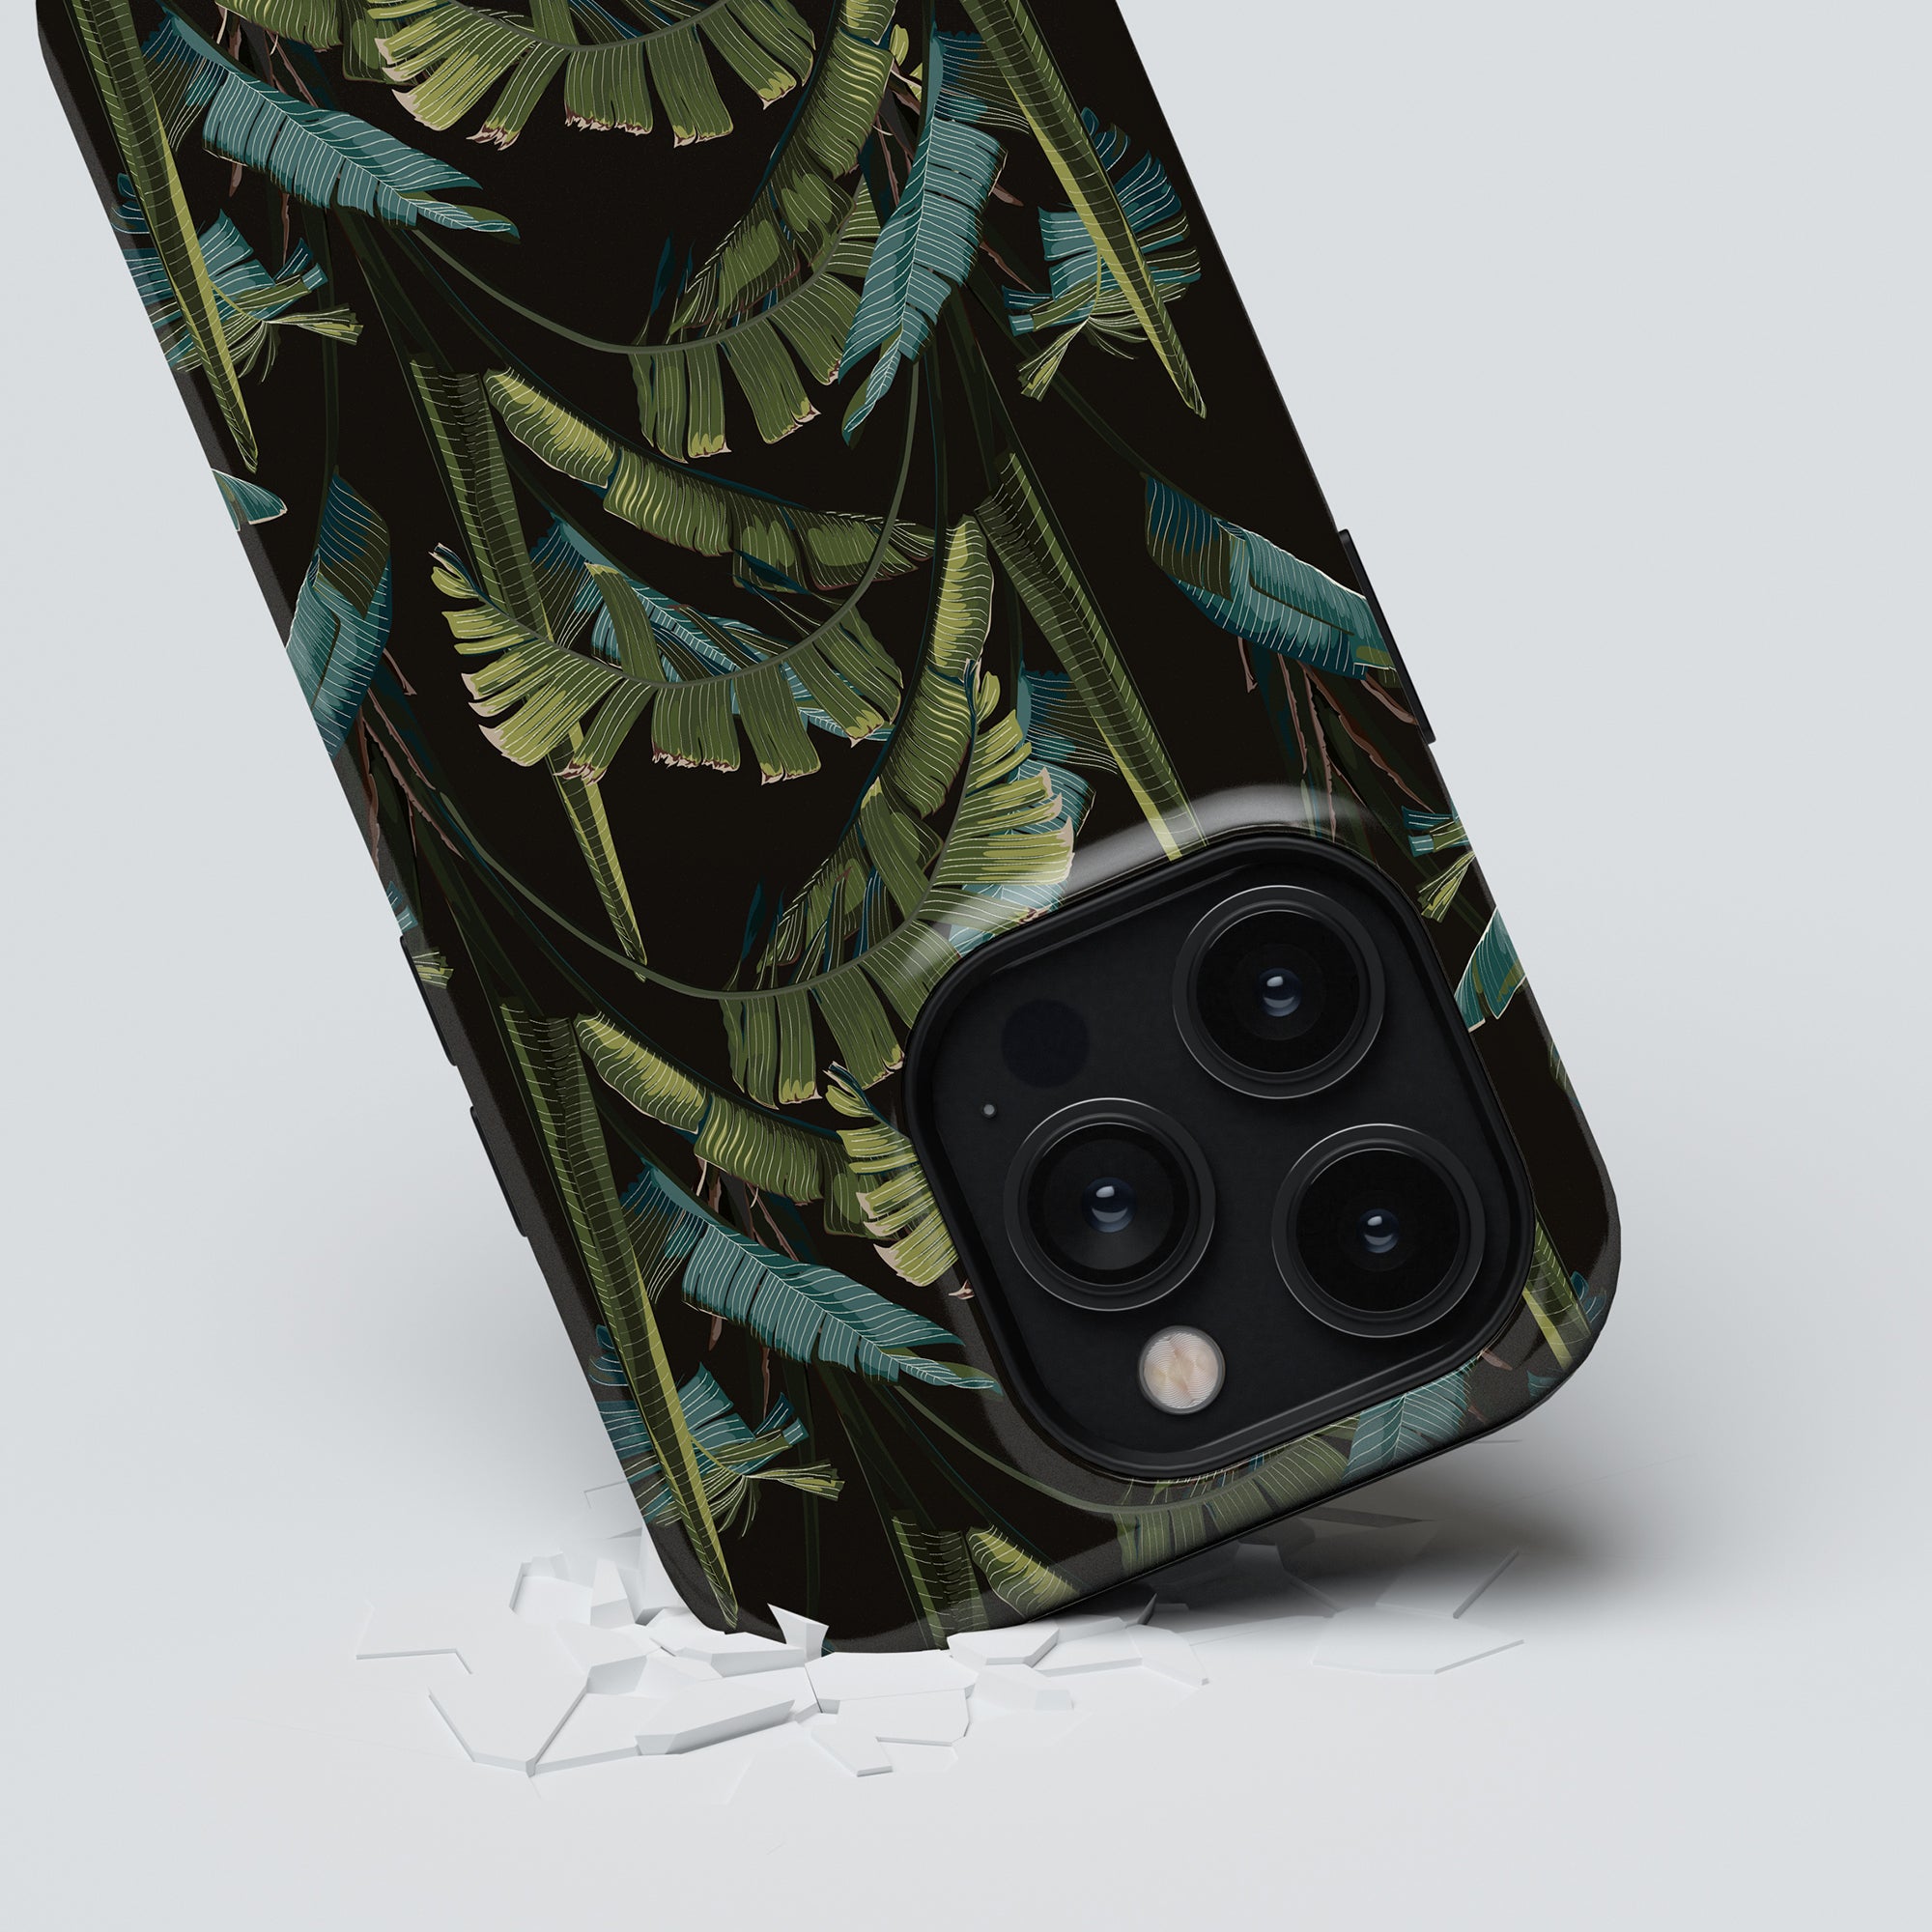 Smartphone with a Mystic Jungle - Tough Case showcasing a tropical leaf pattern making an impression on a white surface.